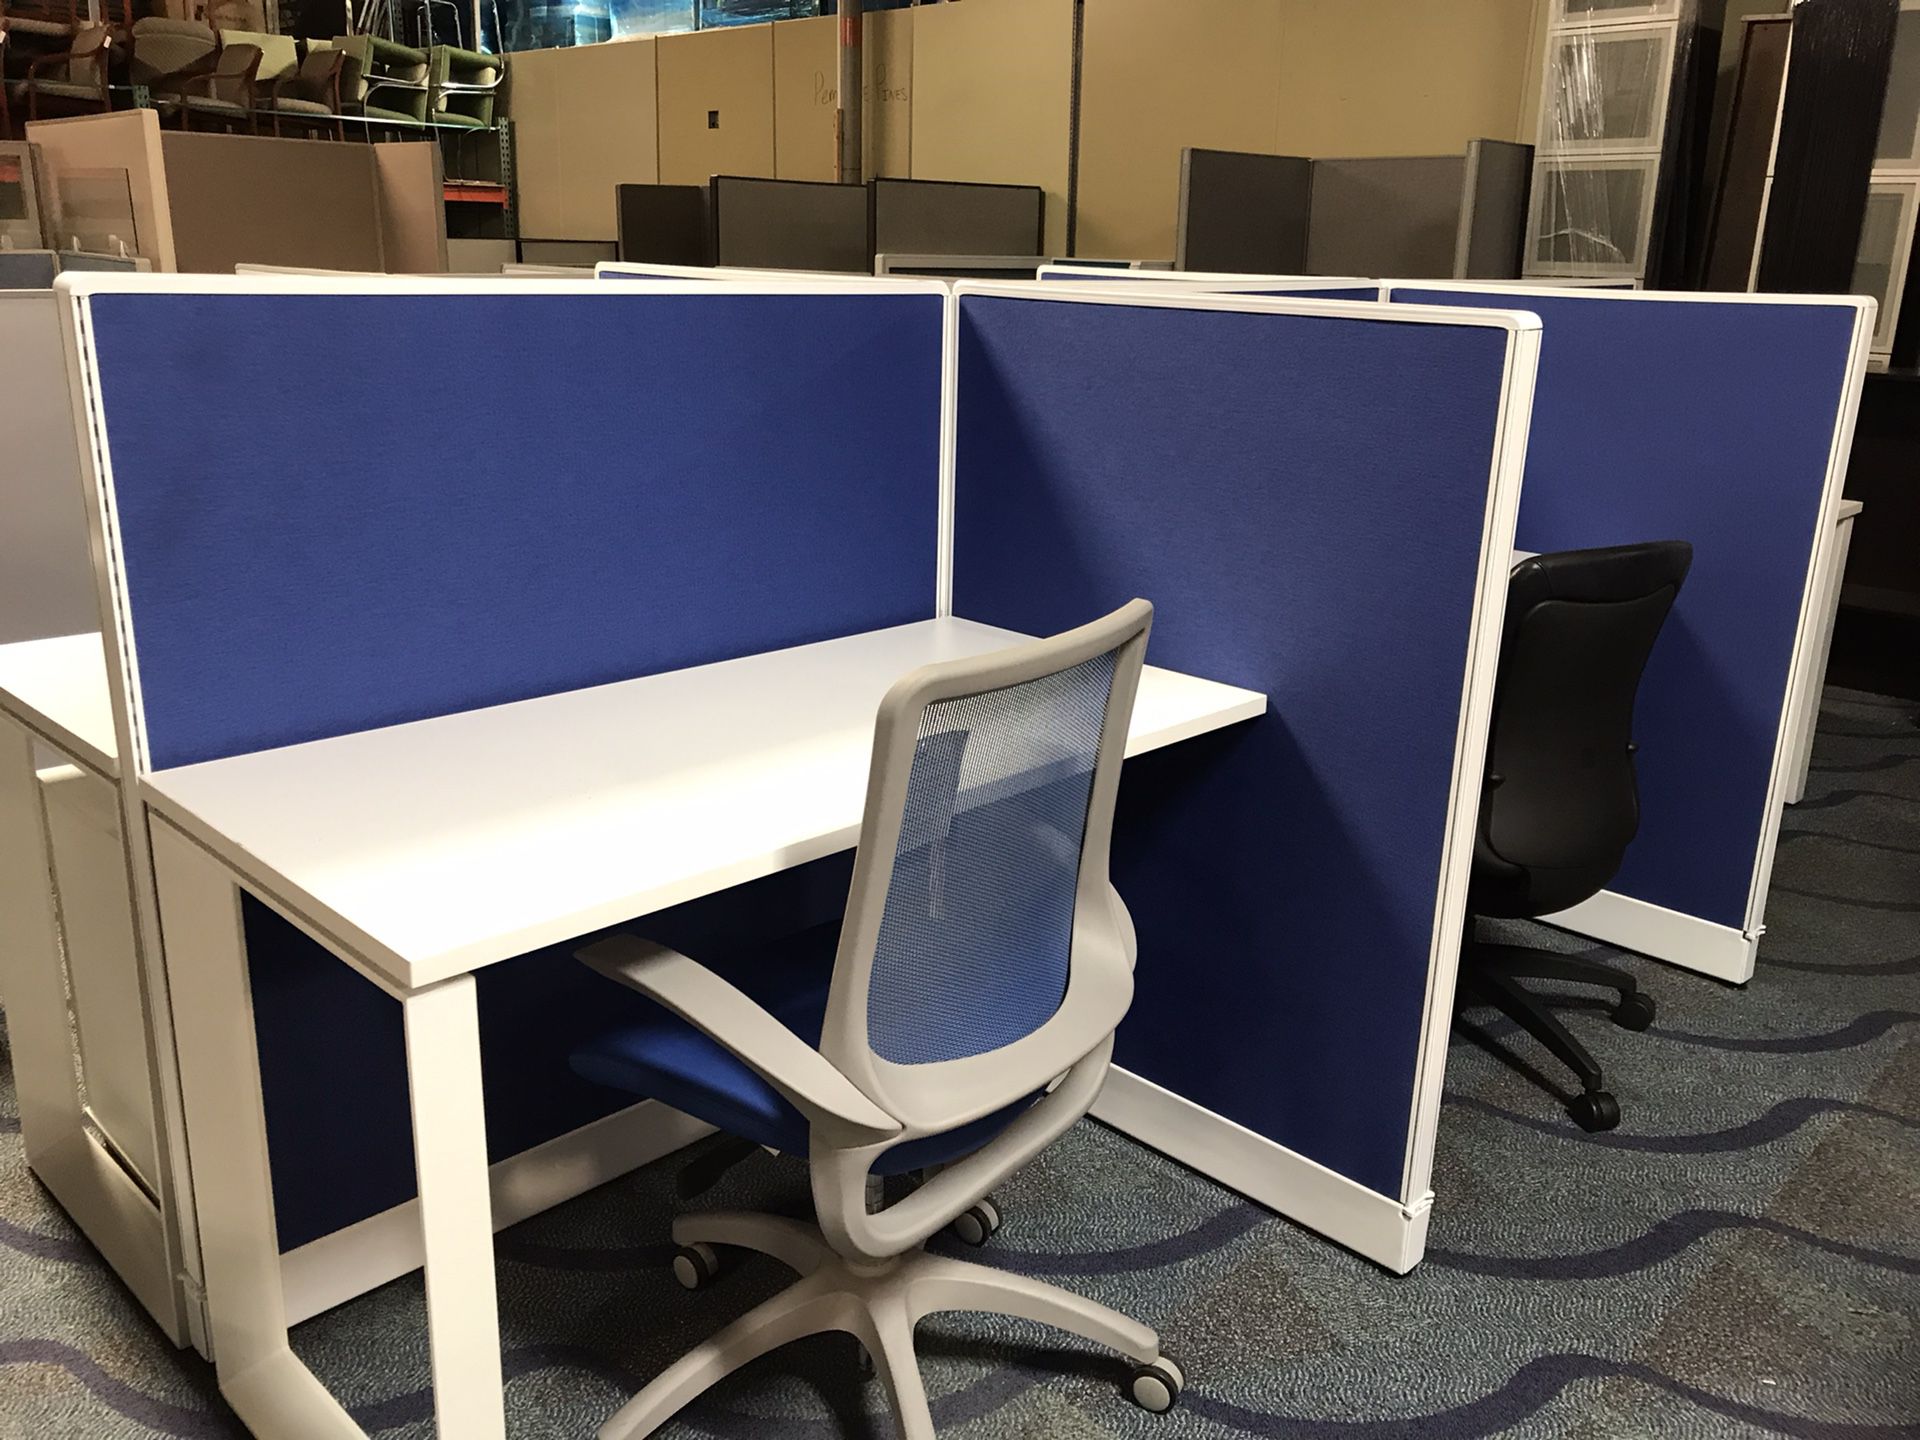 Cubicles, Chairs, Computers and other Office equipment